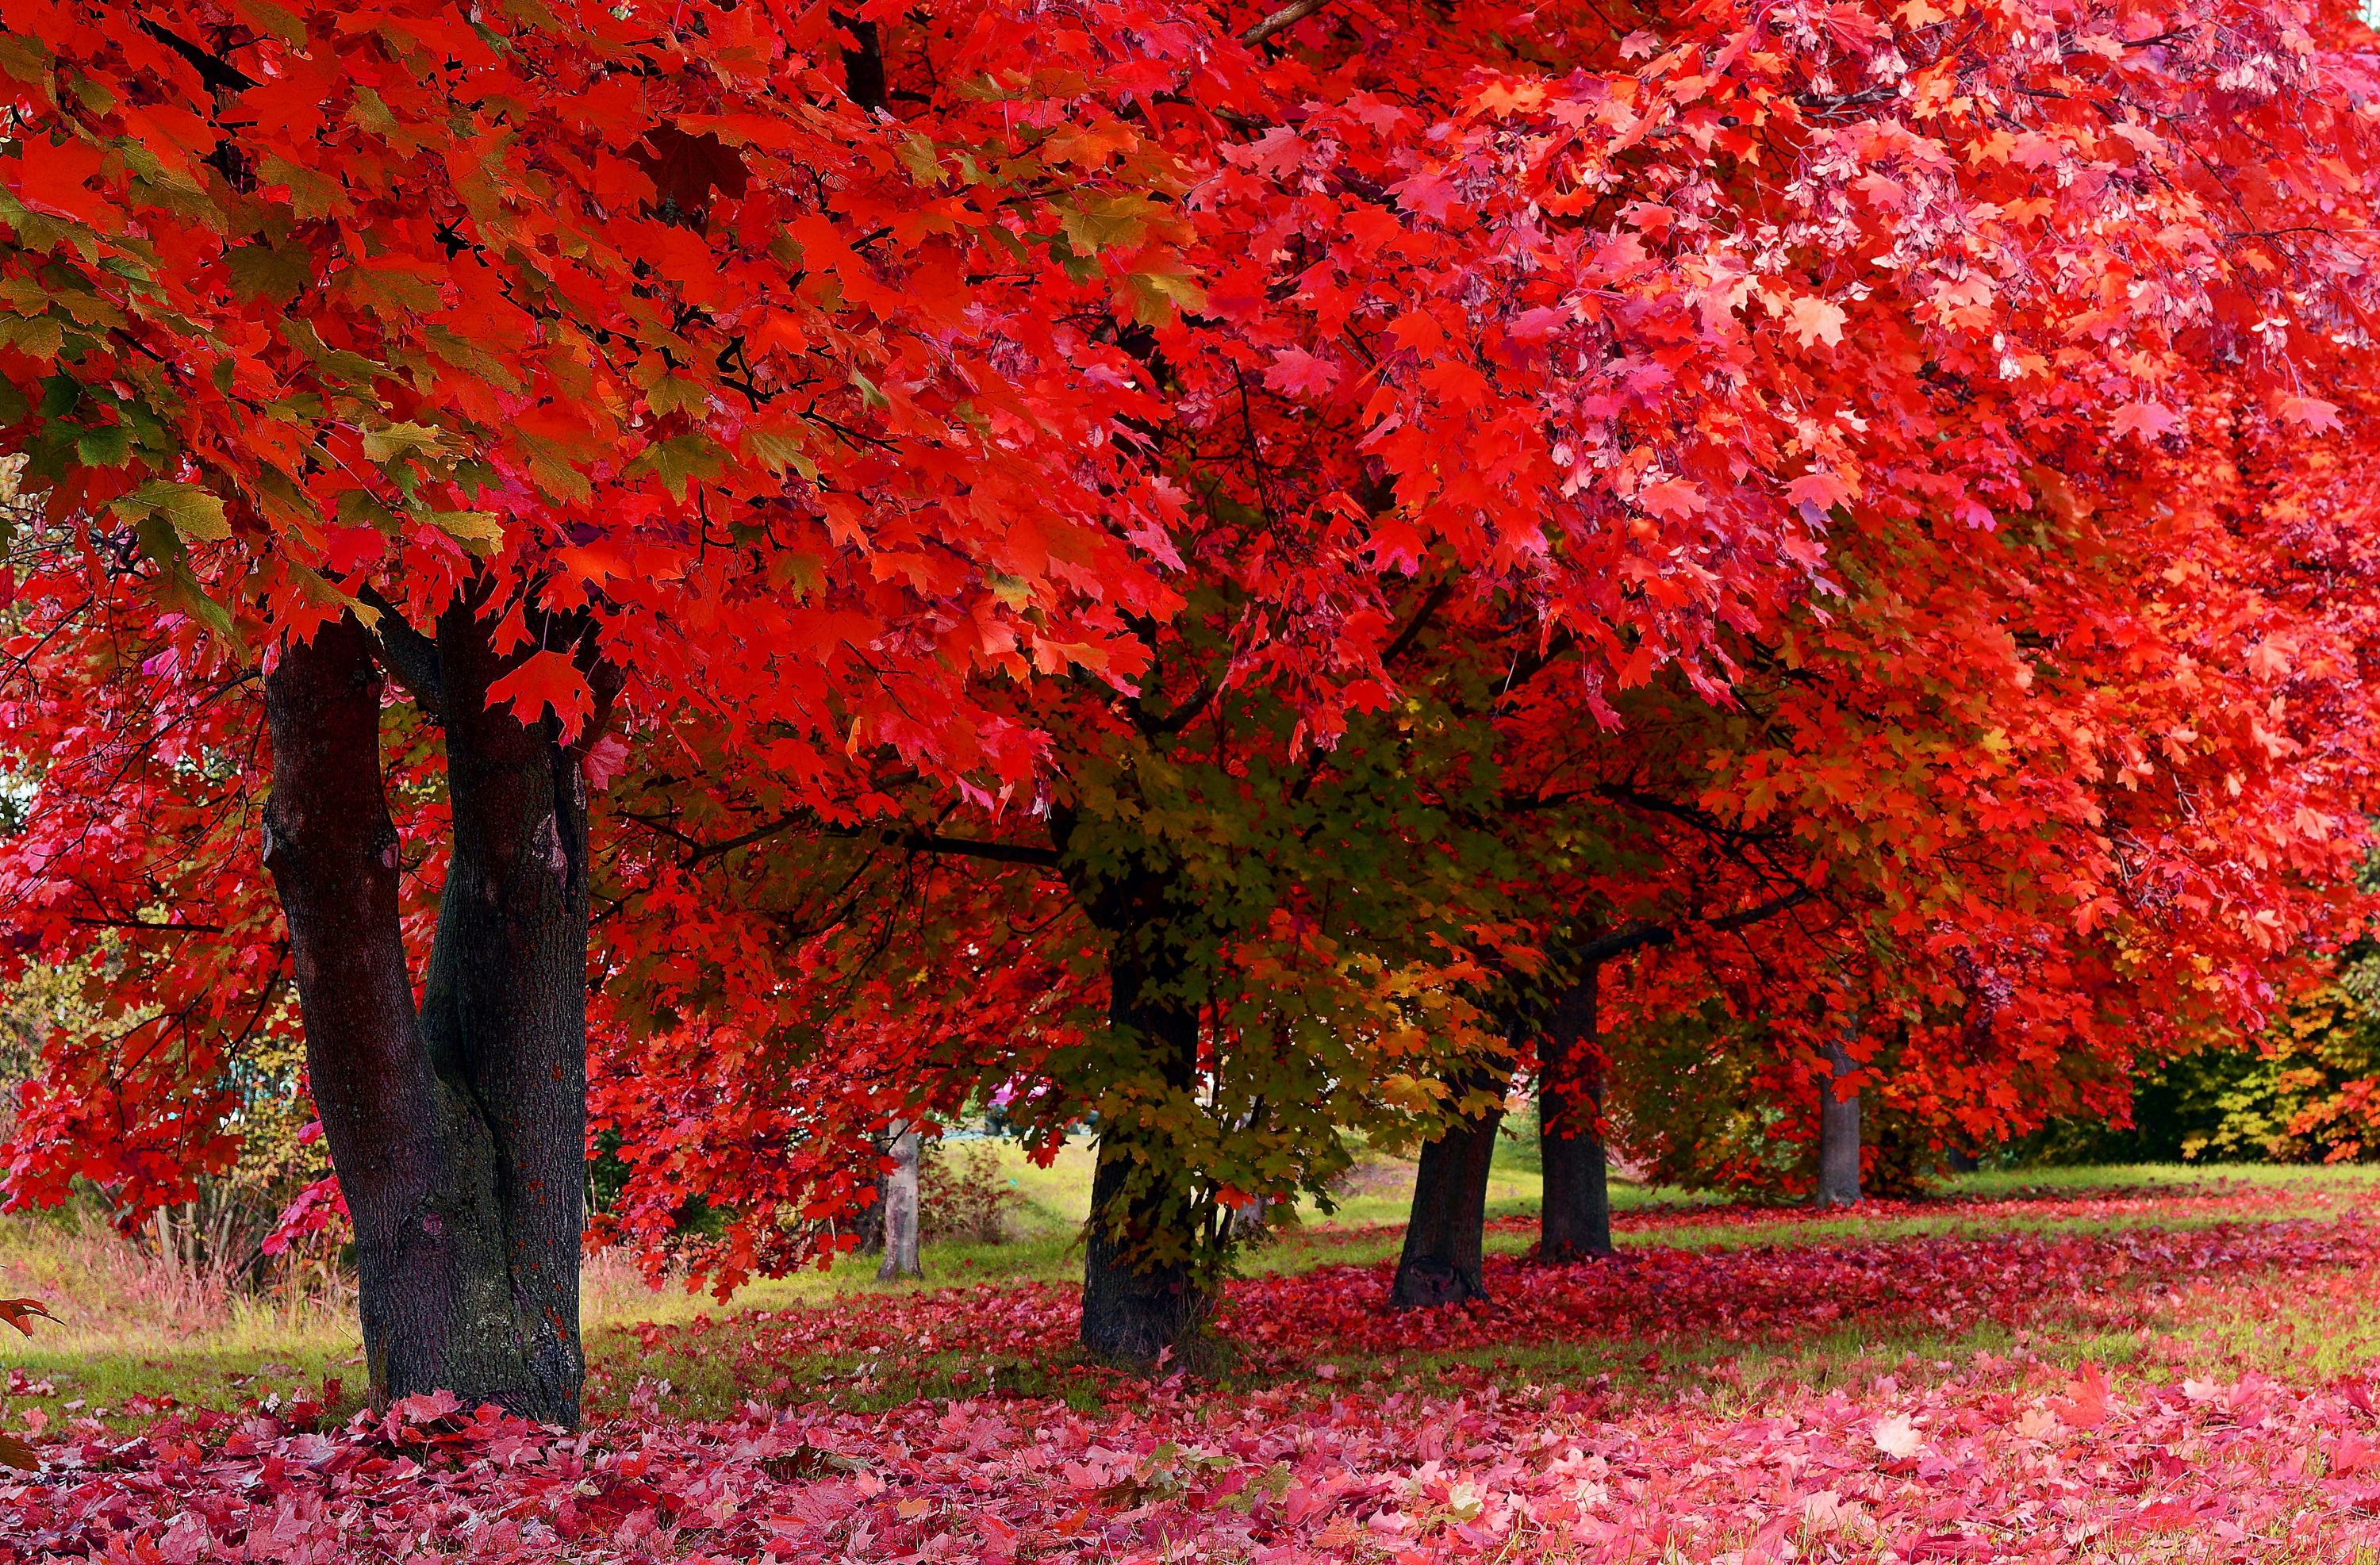 Red maple trees in a park.